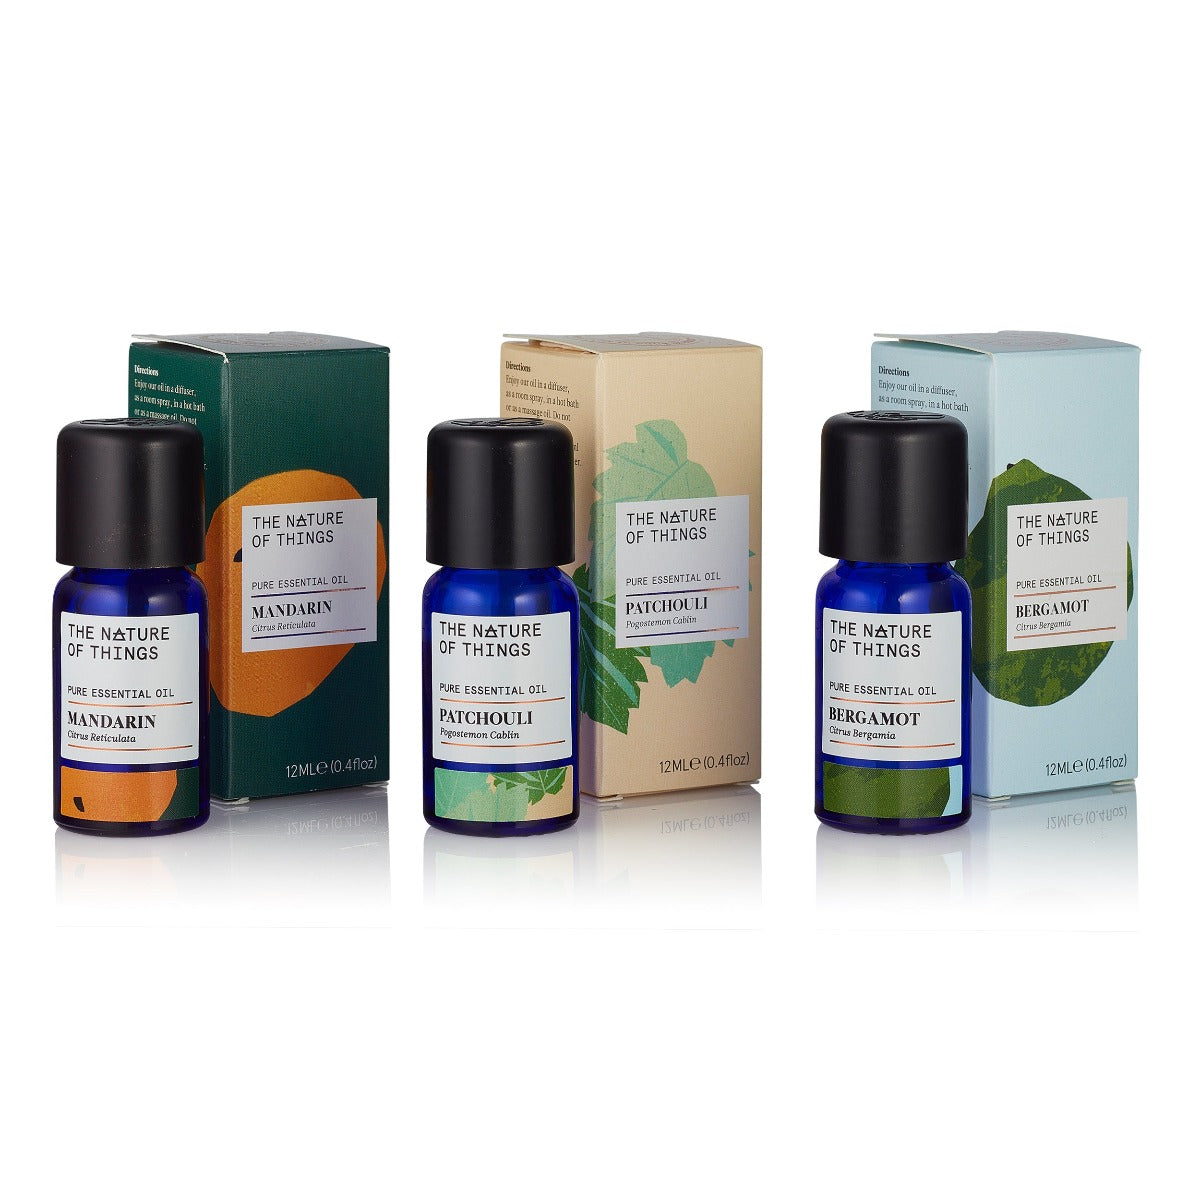 Mandarin, Patchoul and Bergamot Essential Oils from The Nature of Things